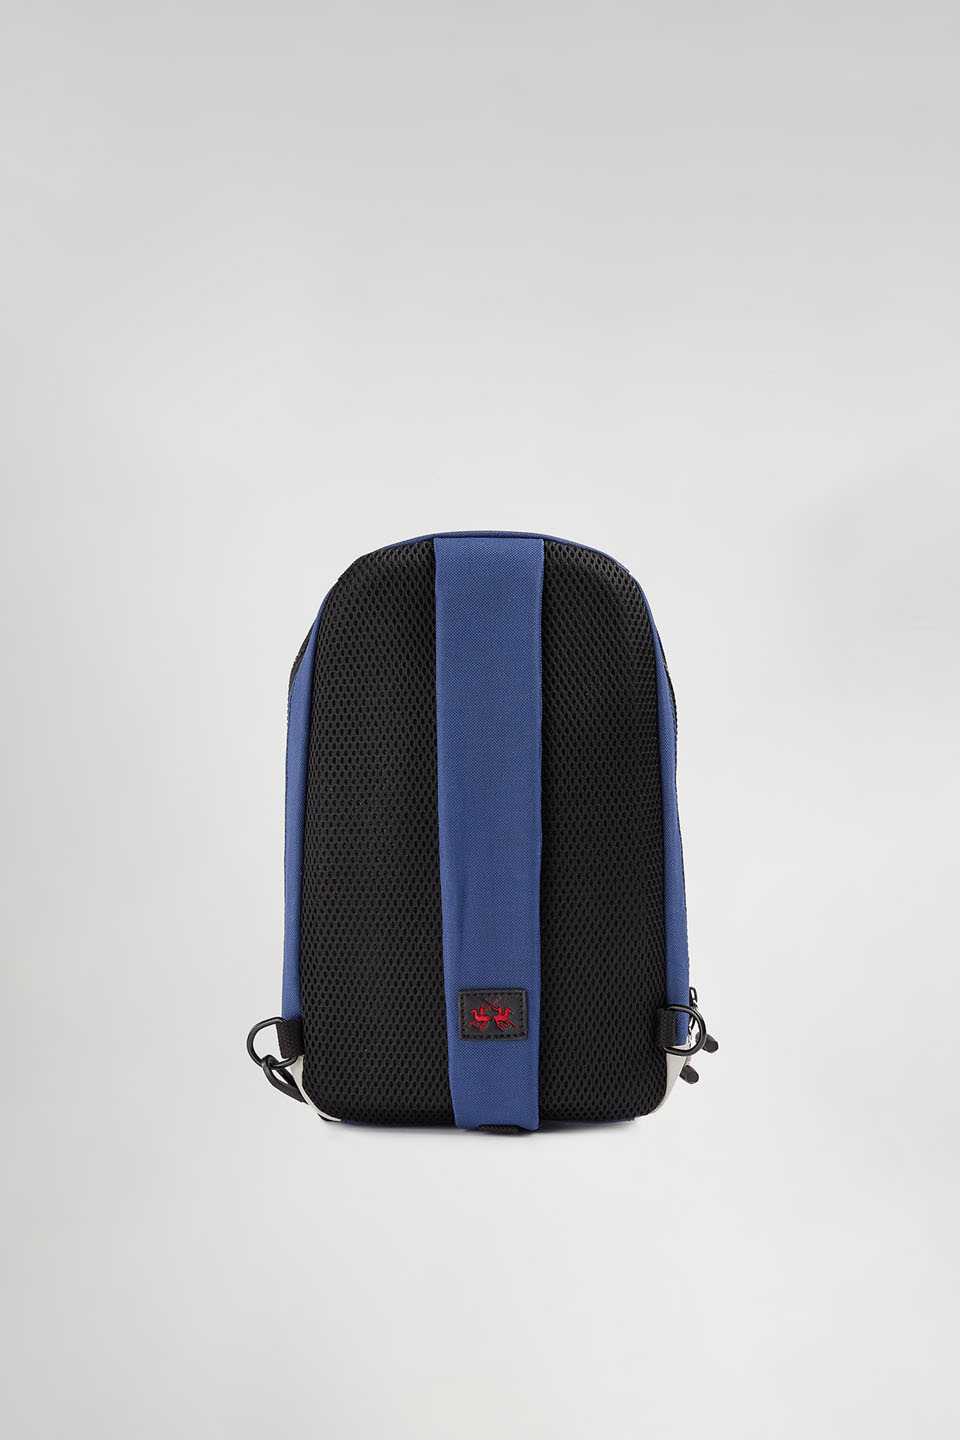 Small polyester crossbody backpack. | La Martina - Official Online Shop